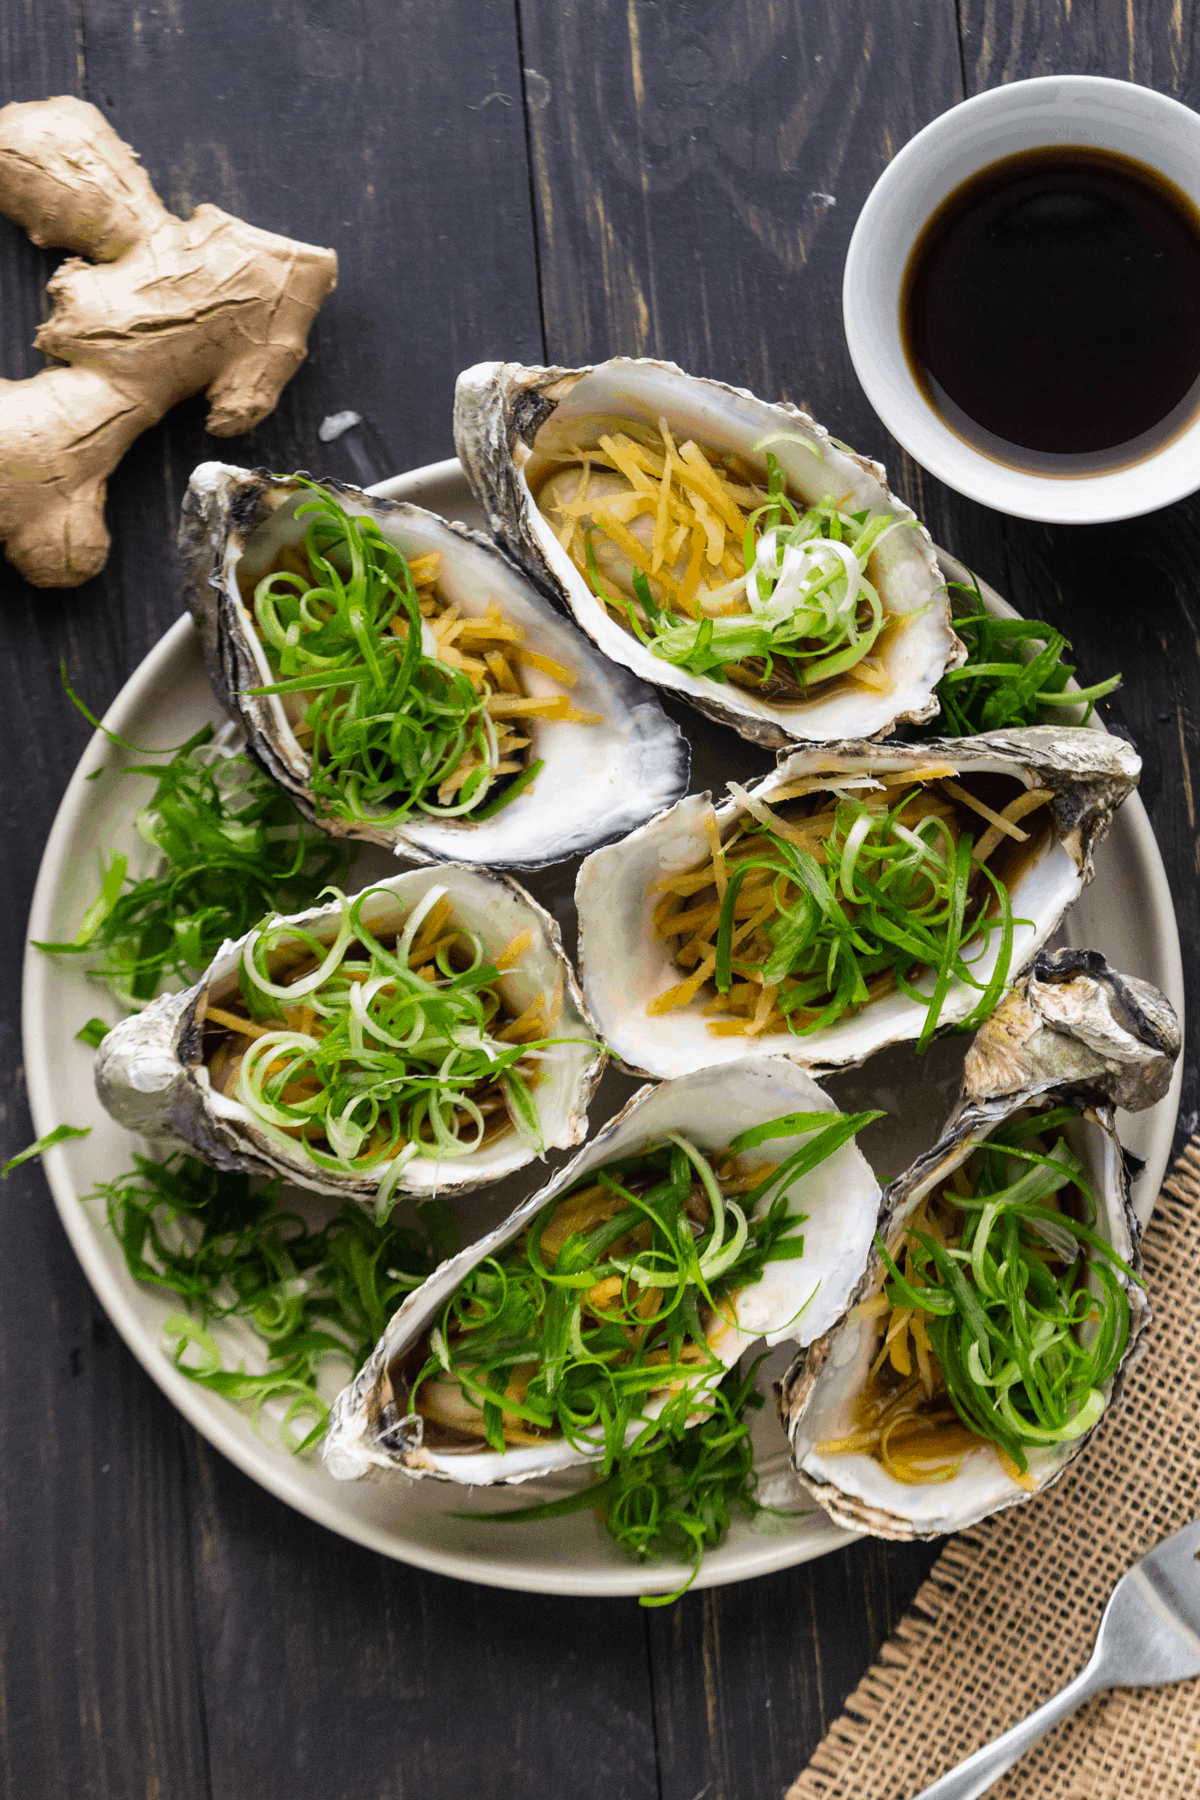 steam-oysters-with-ginger-and-shallots-saved-for-web-1708336642380-17083366426381586486973-1708420347793-17084203479541033110147.png